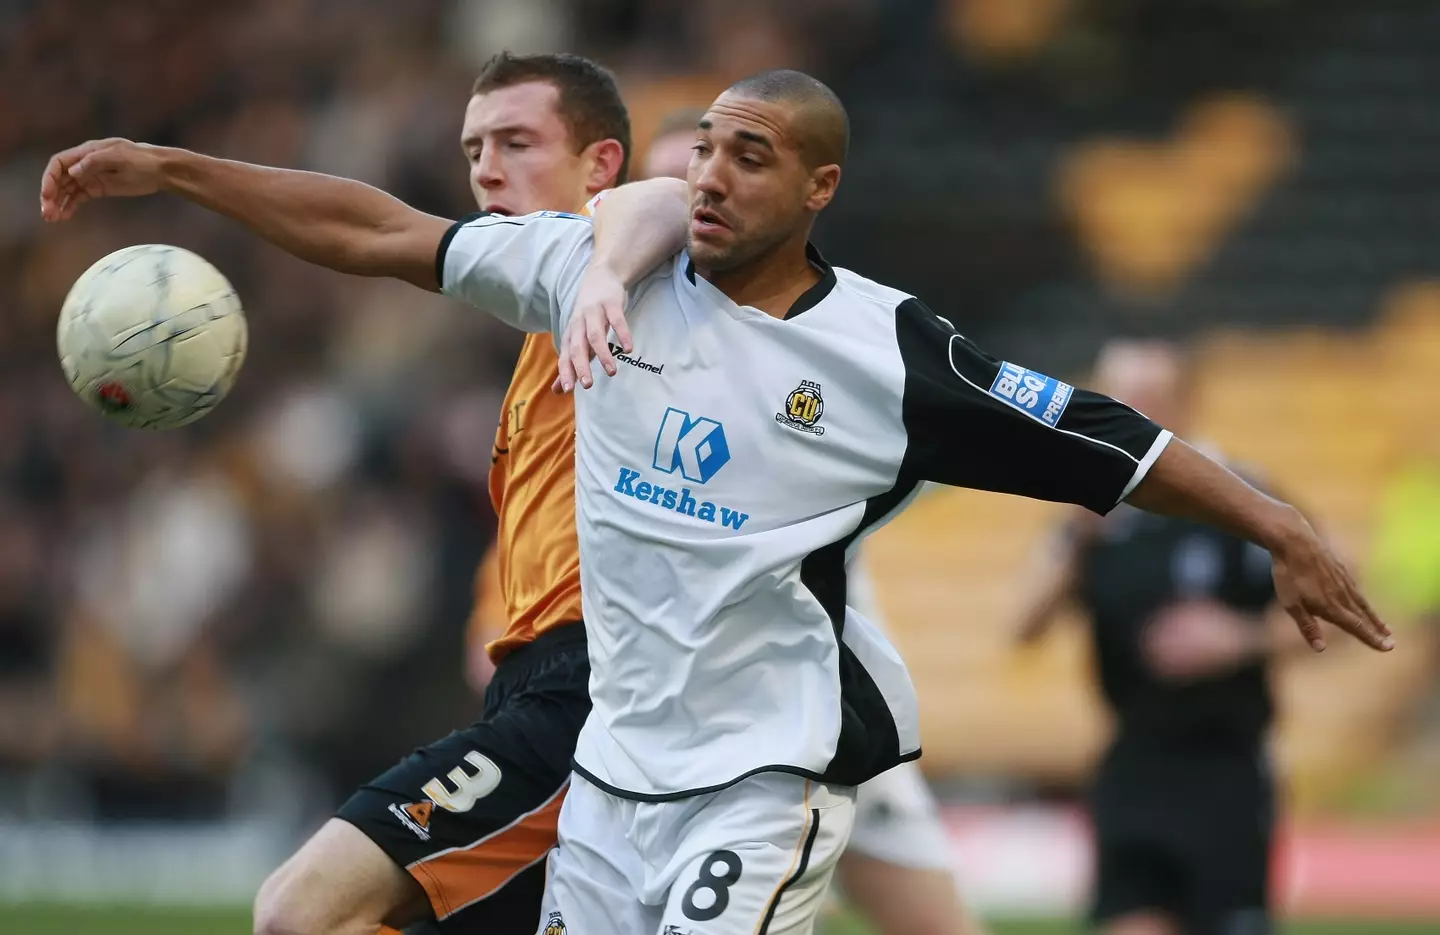 Wolleaston during his time with Cambridge United. (Image